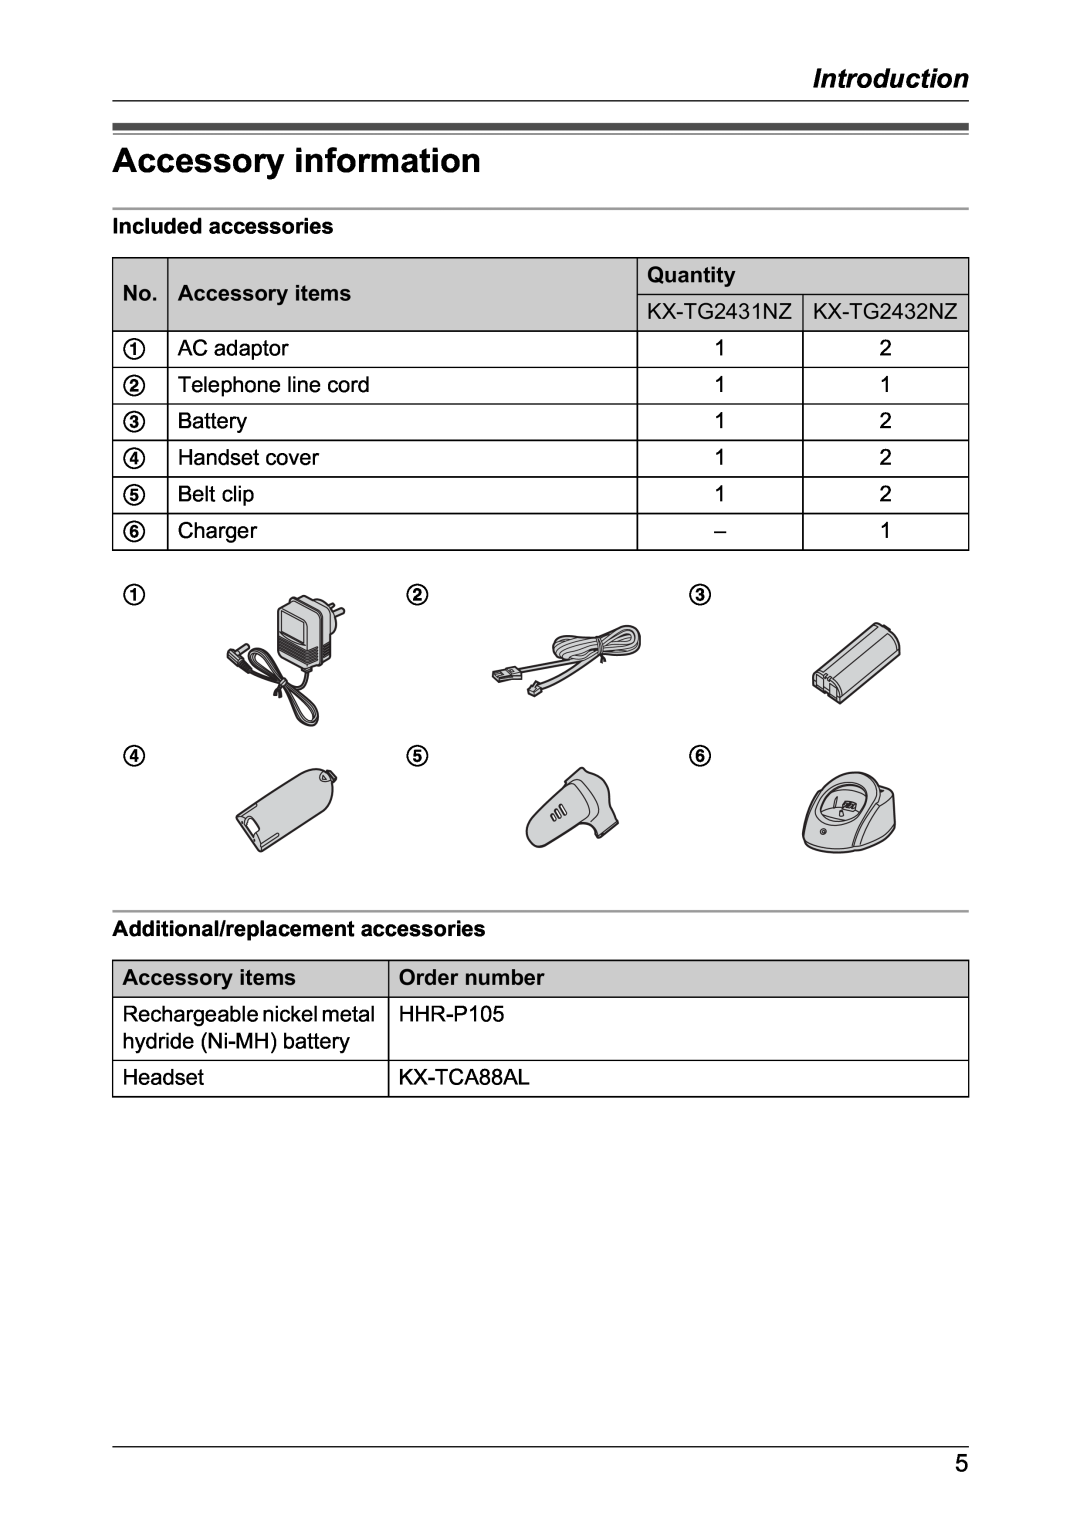 Panasonic KX-TG2432NZ Accessory information, Included accessories, Accessory items, Quantity, Order number, Introduction 